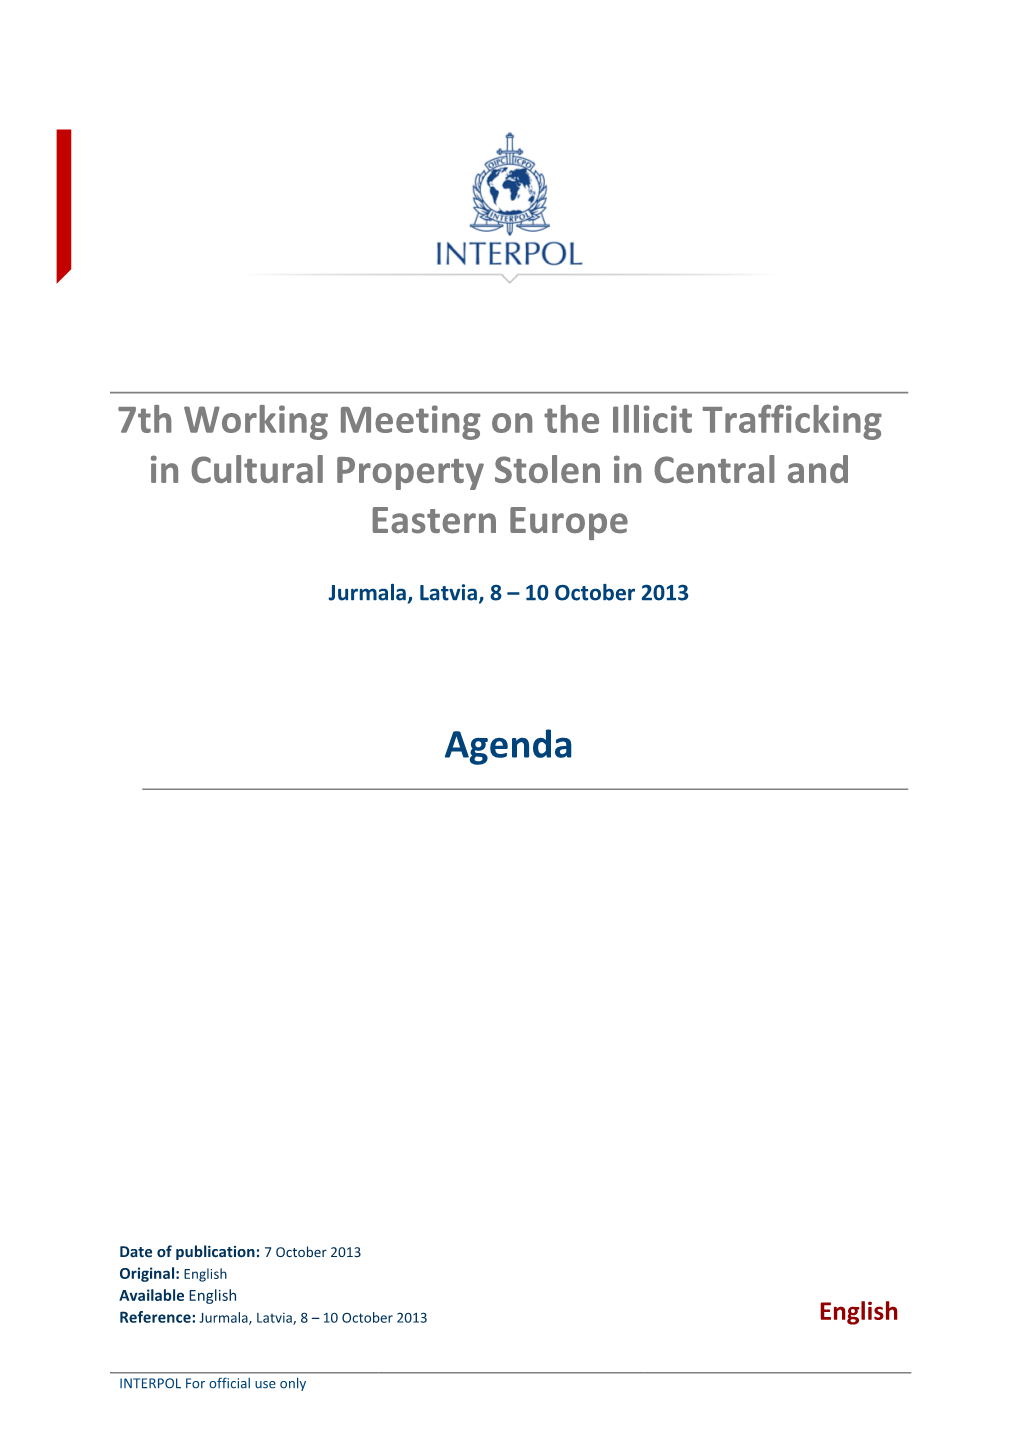 7Th Working Meeting on the Illicit Trafficking in Cultural Property Stolen in Central and Eastern Europe